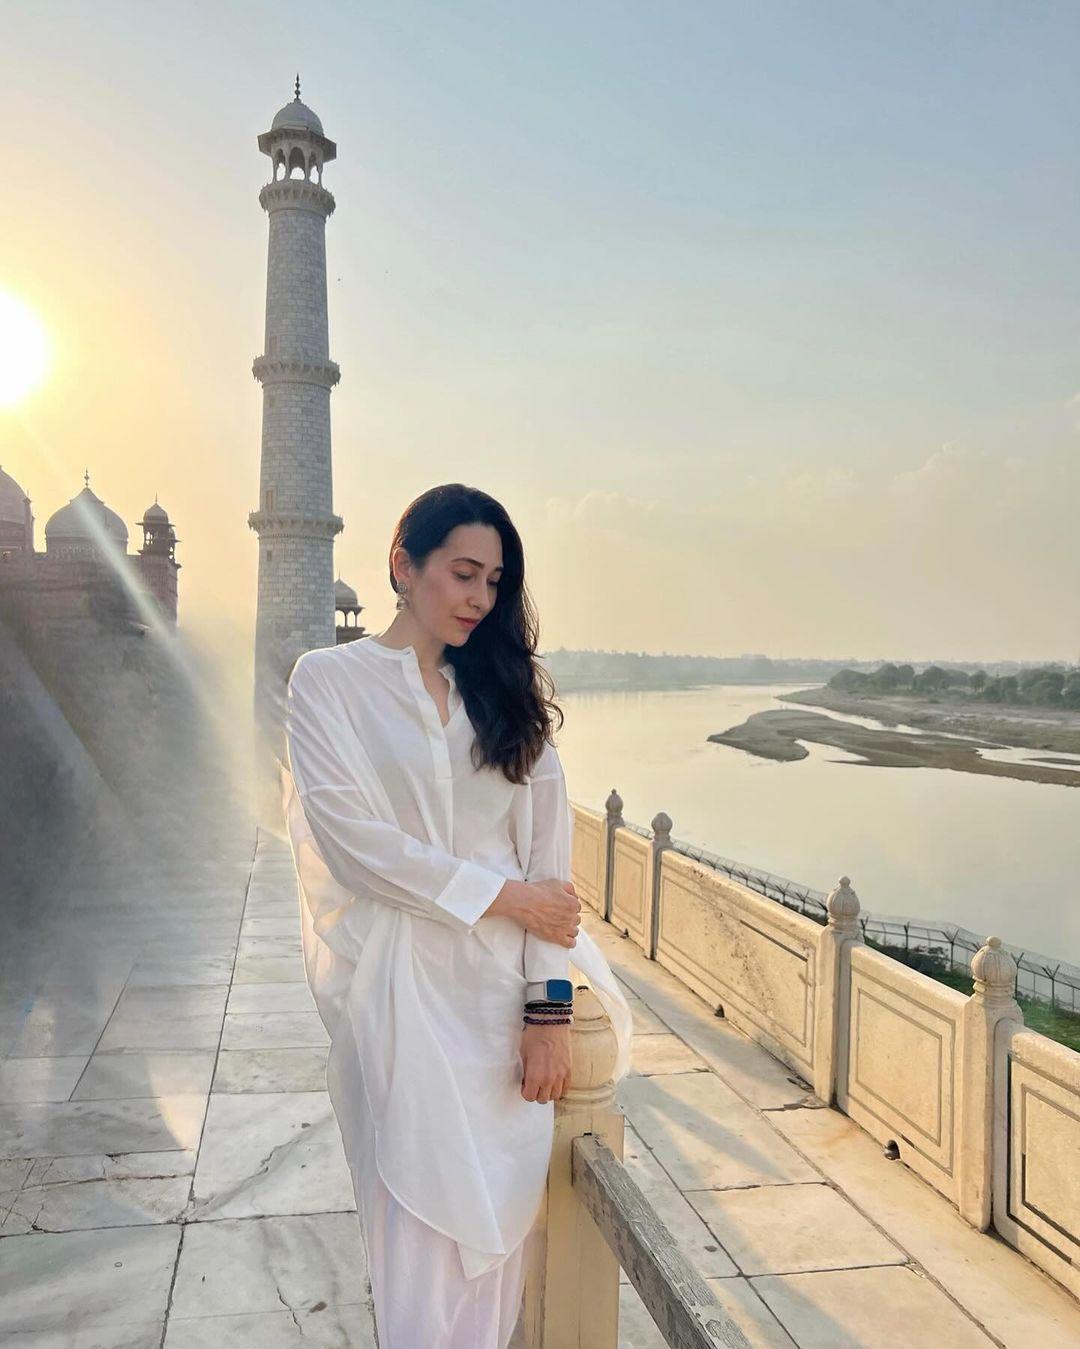 If you want something stylish yet traditional, then Karisma Kapoor is here to lift your mood. The actress wore stylish dhoti pants and paired them with a short kurti, which is just a perfect fit for the day